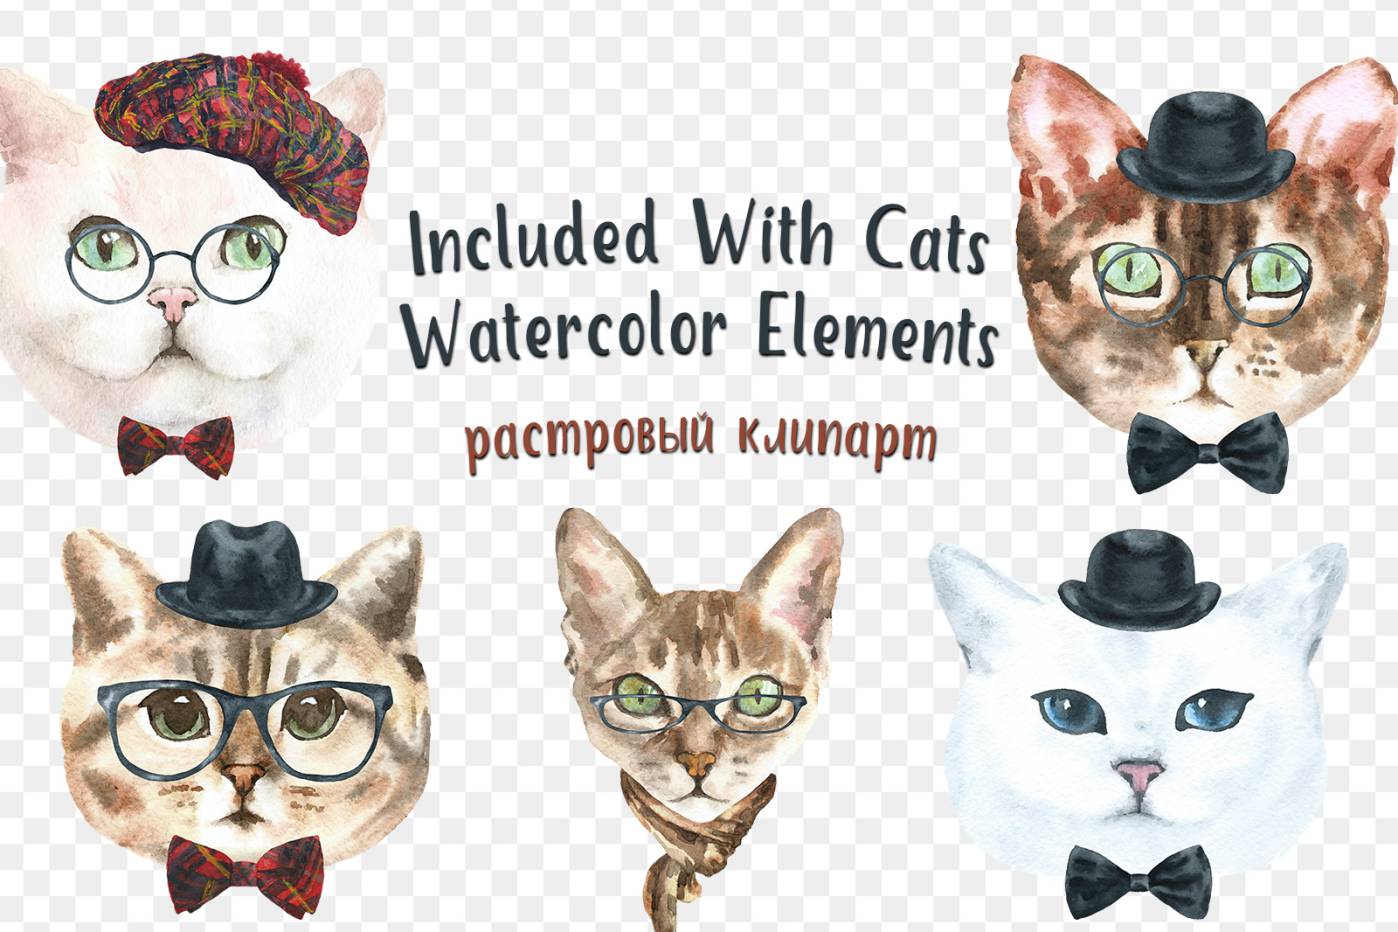 Free Cats Watercolor Elements png